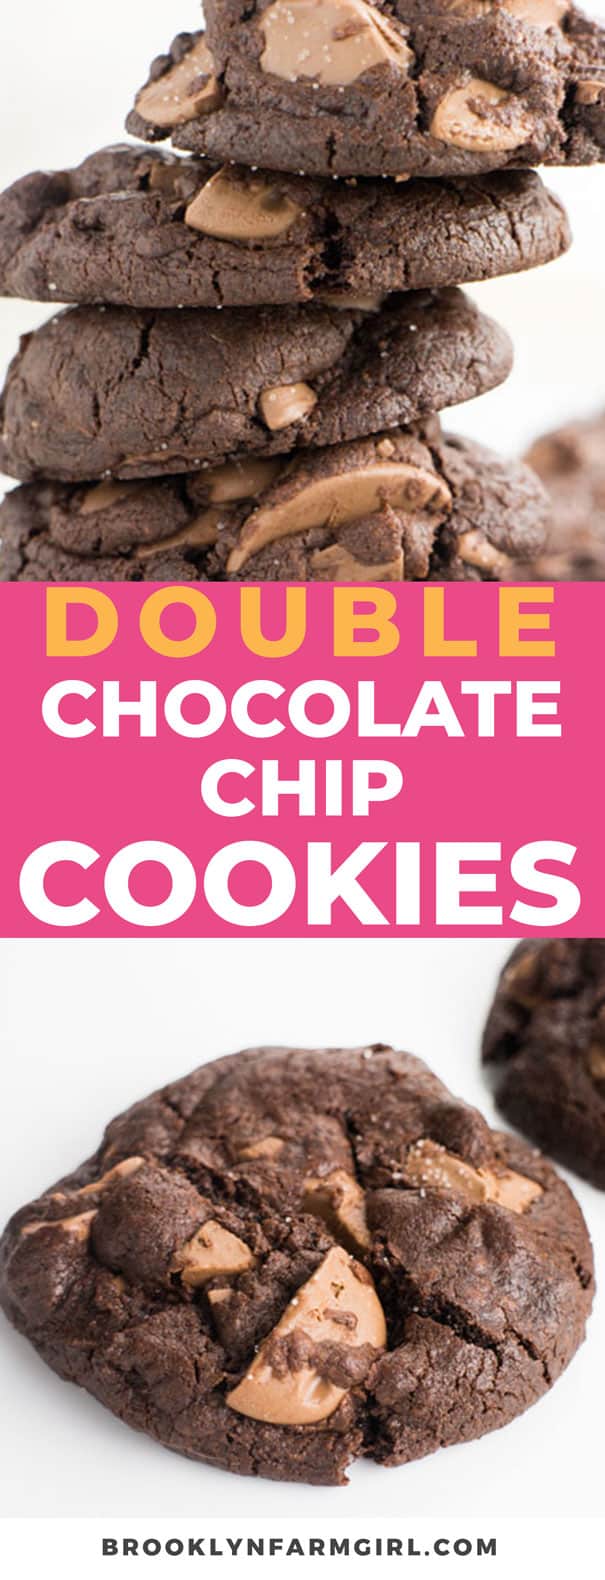  Double Chocolate Chip Cookies are thick, chewy and loaded with chocolate! These cookies are made from scratch and you’ll love how EASY the recipe is! Live dangerously with these irresistible, softest chocolate chip cookies that have a dash of sea salt on top!  One of our favorite homemade cookies to make around the holidays or anytime. 